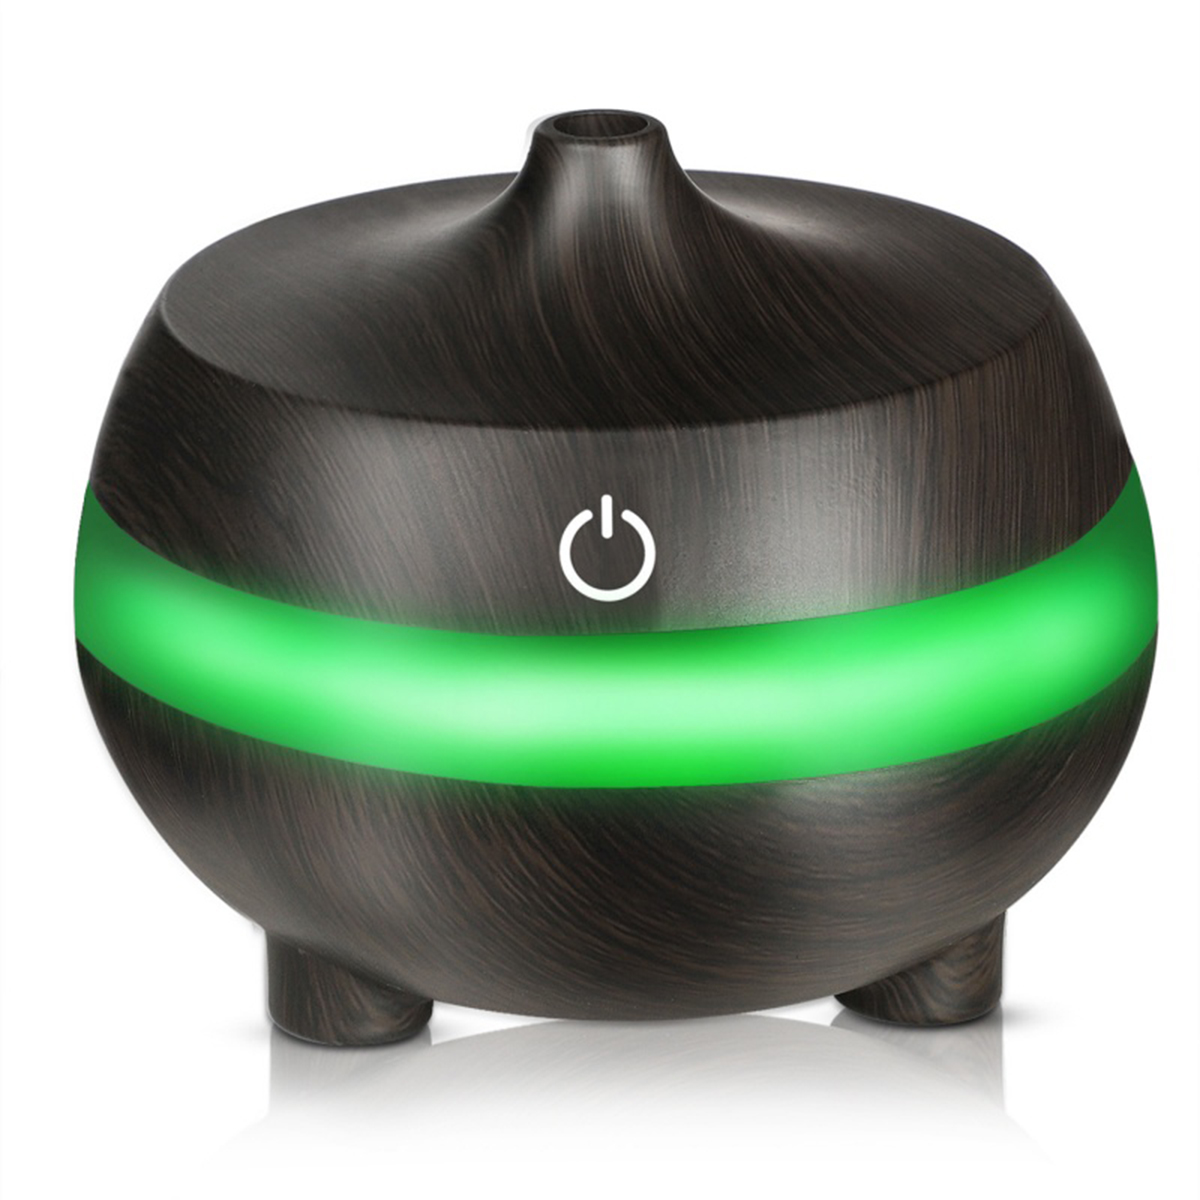 

7 Soothing LED Light Ultrasonic Aroma Diffuser Essential Oil Humidifier Air Aromatherapy Purifier